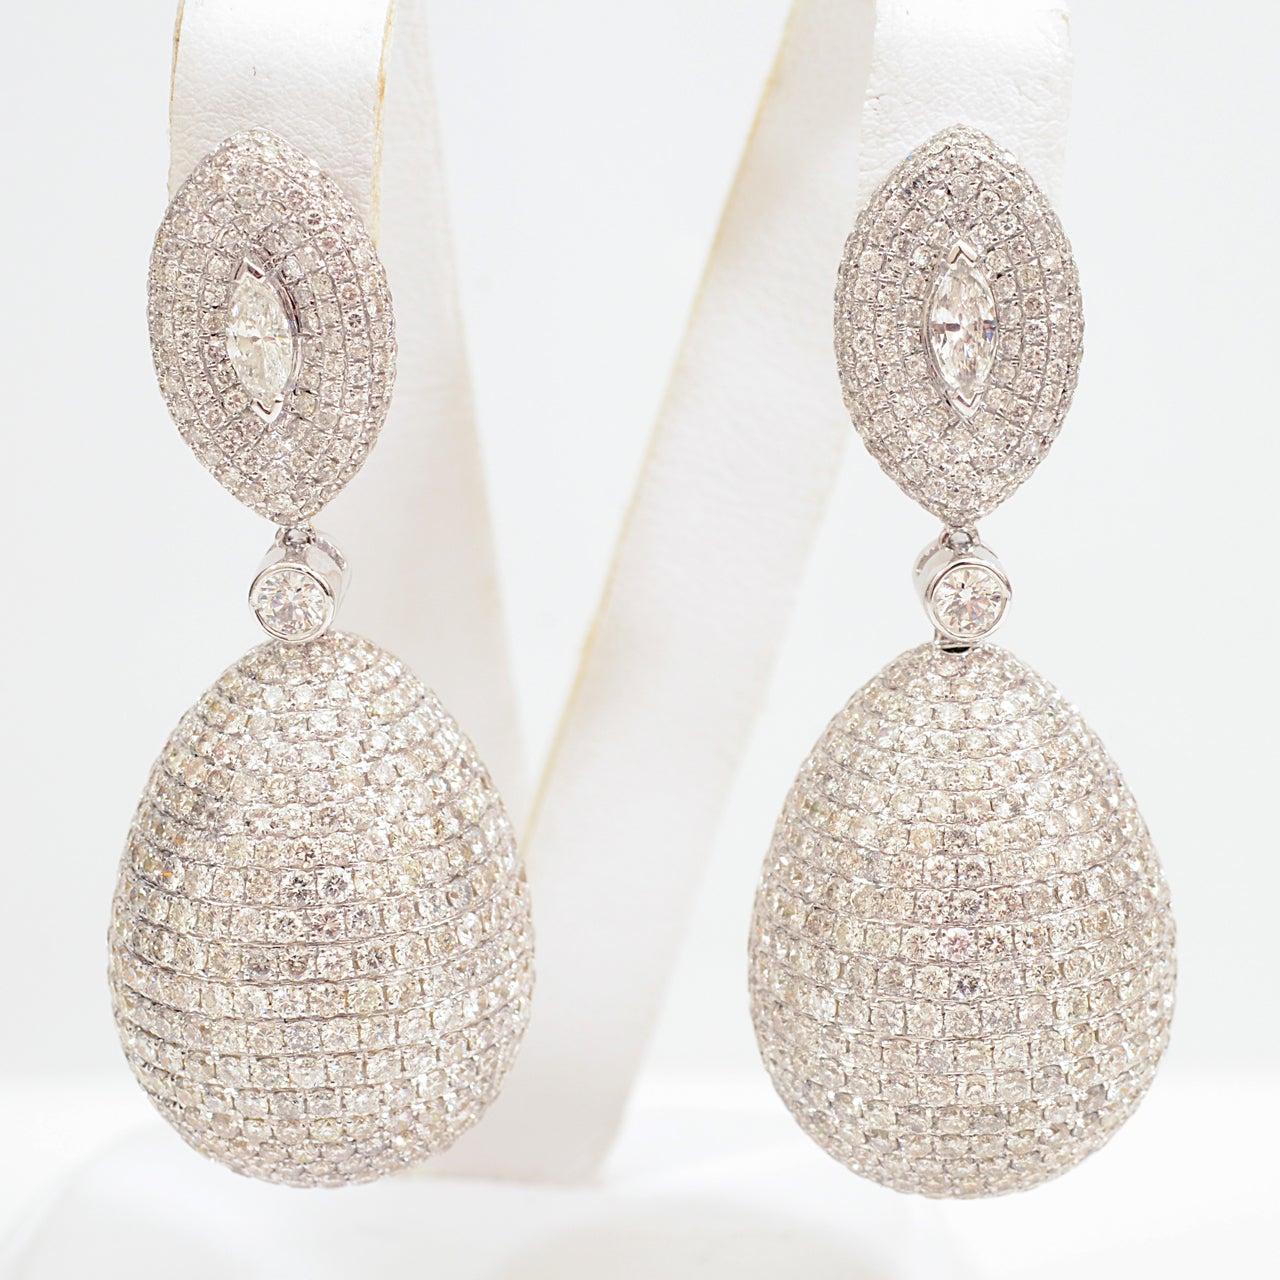 Diamond Oval Earrings. 18k White Gold; consist of 1436 Rounds and 2 Marquise of diamonds weighing approximately 25.46 carats.
 
The diamonds are F-G color.